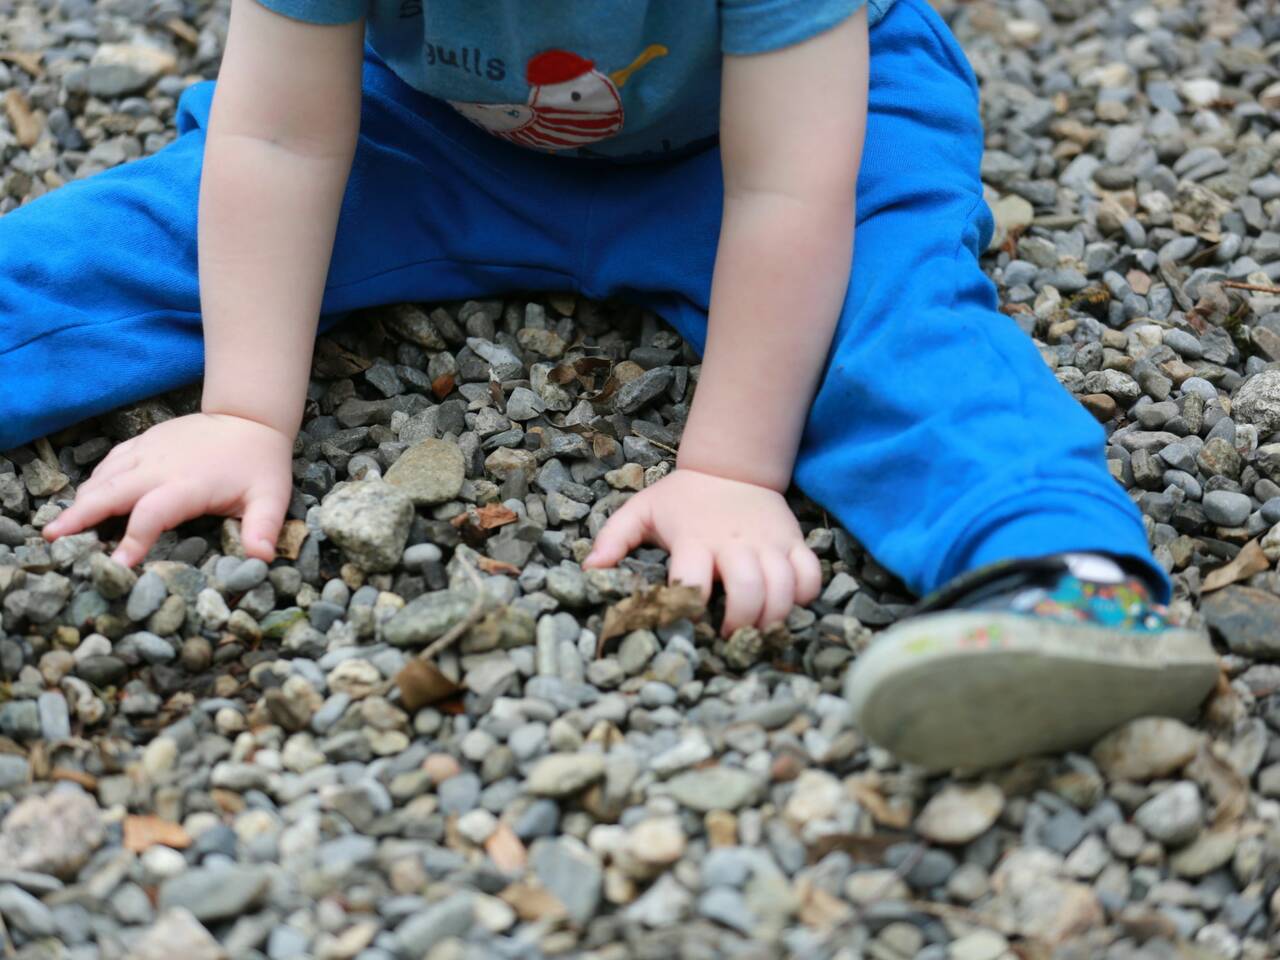 Playing with rocks